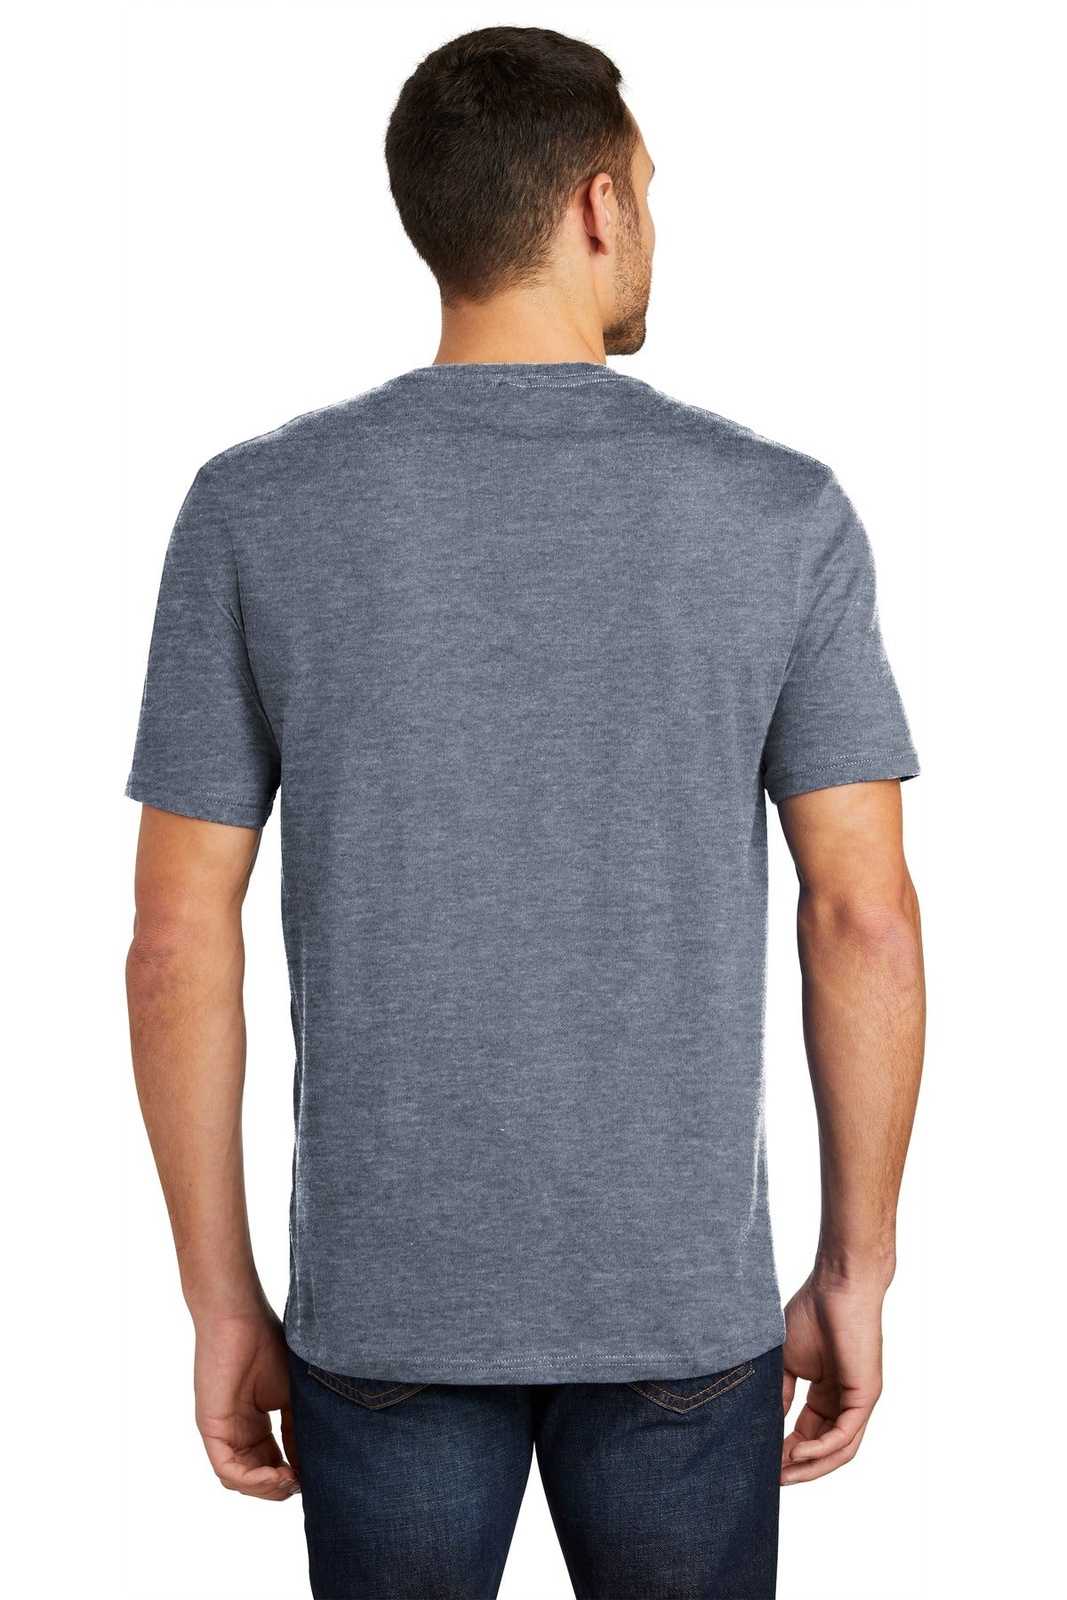 District DT104 Perfect Weight Tee - Heathered Navy - HIT a Double - 1